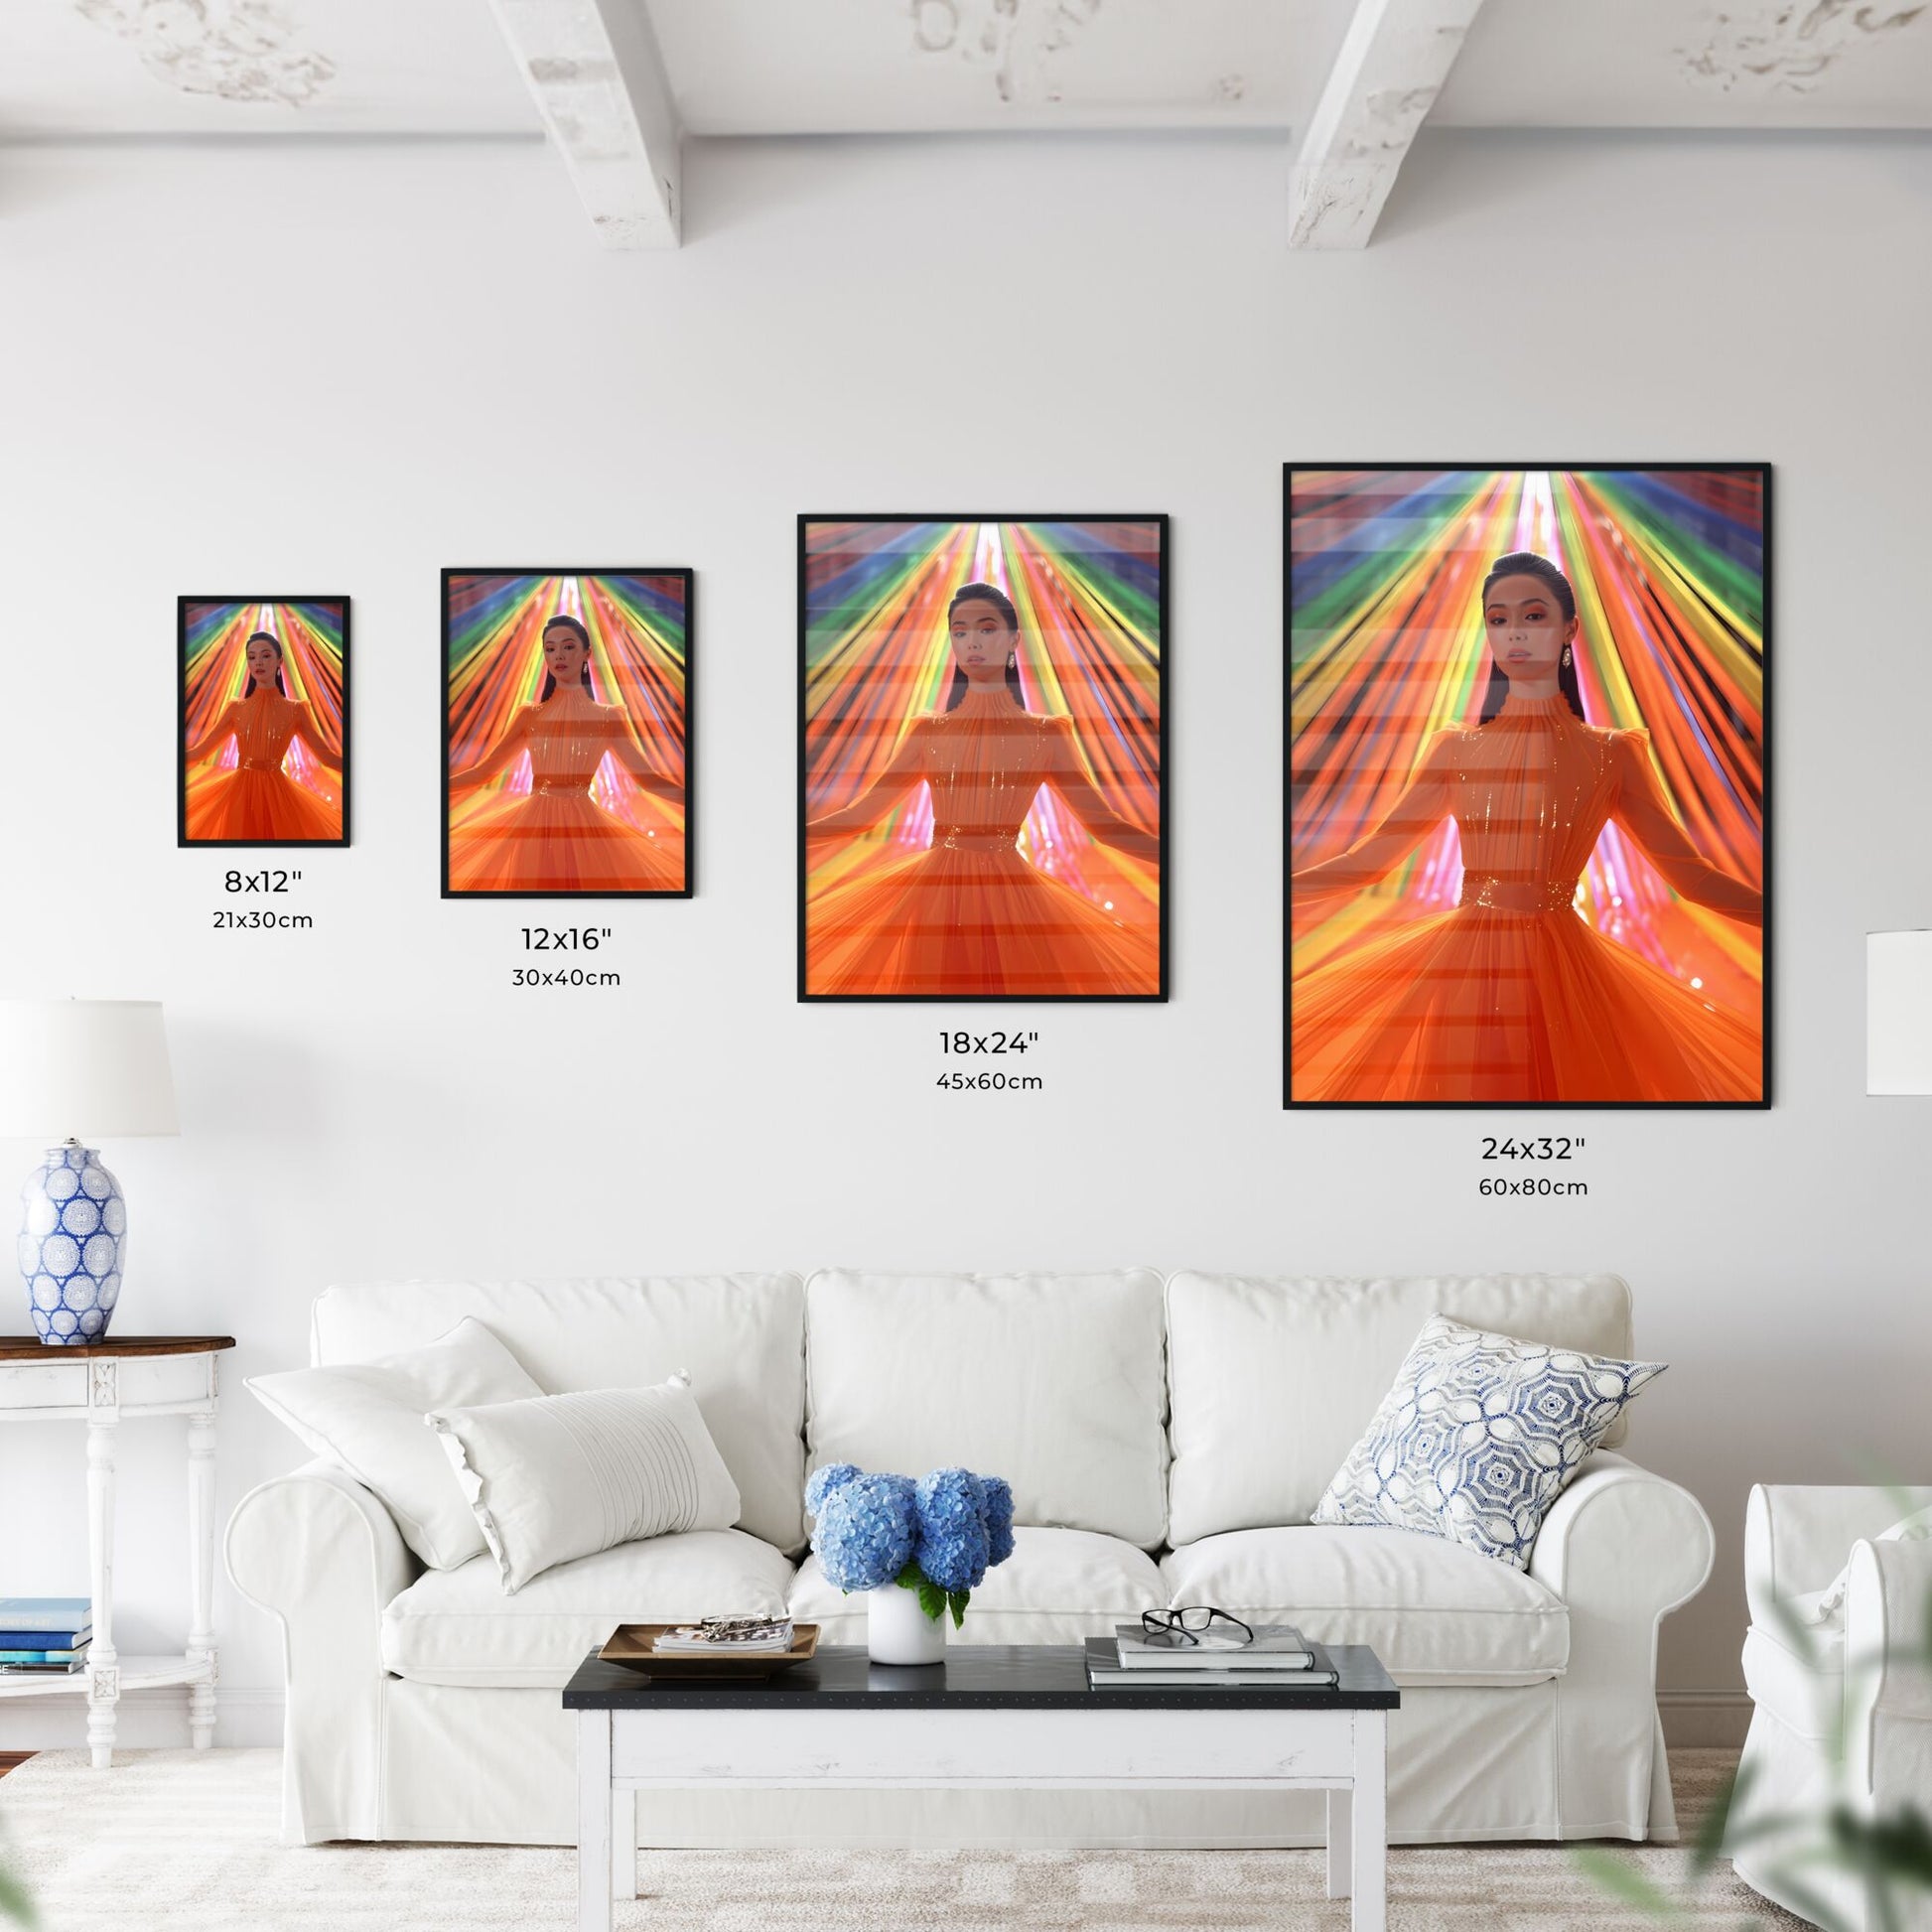 Posters and announcements design - Art print of a woman in an orange dress Default Title